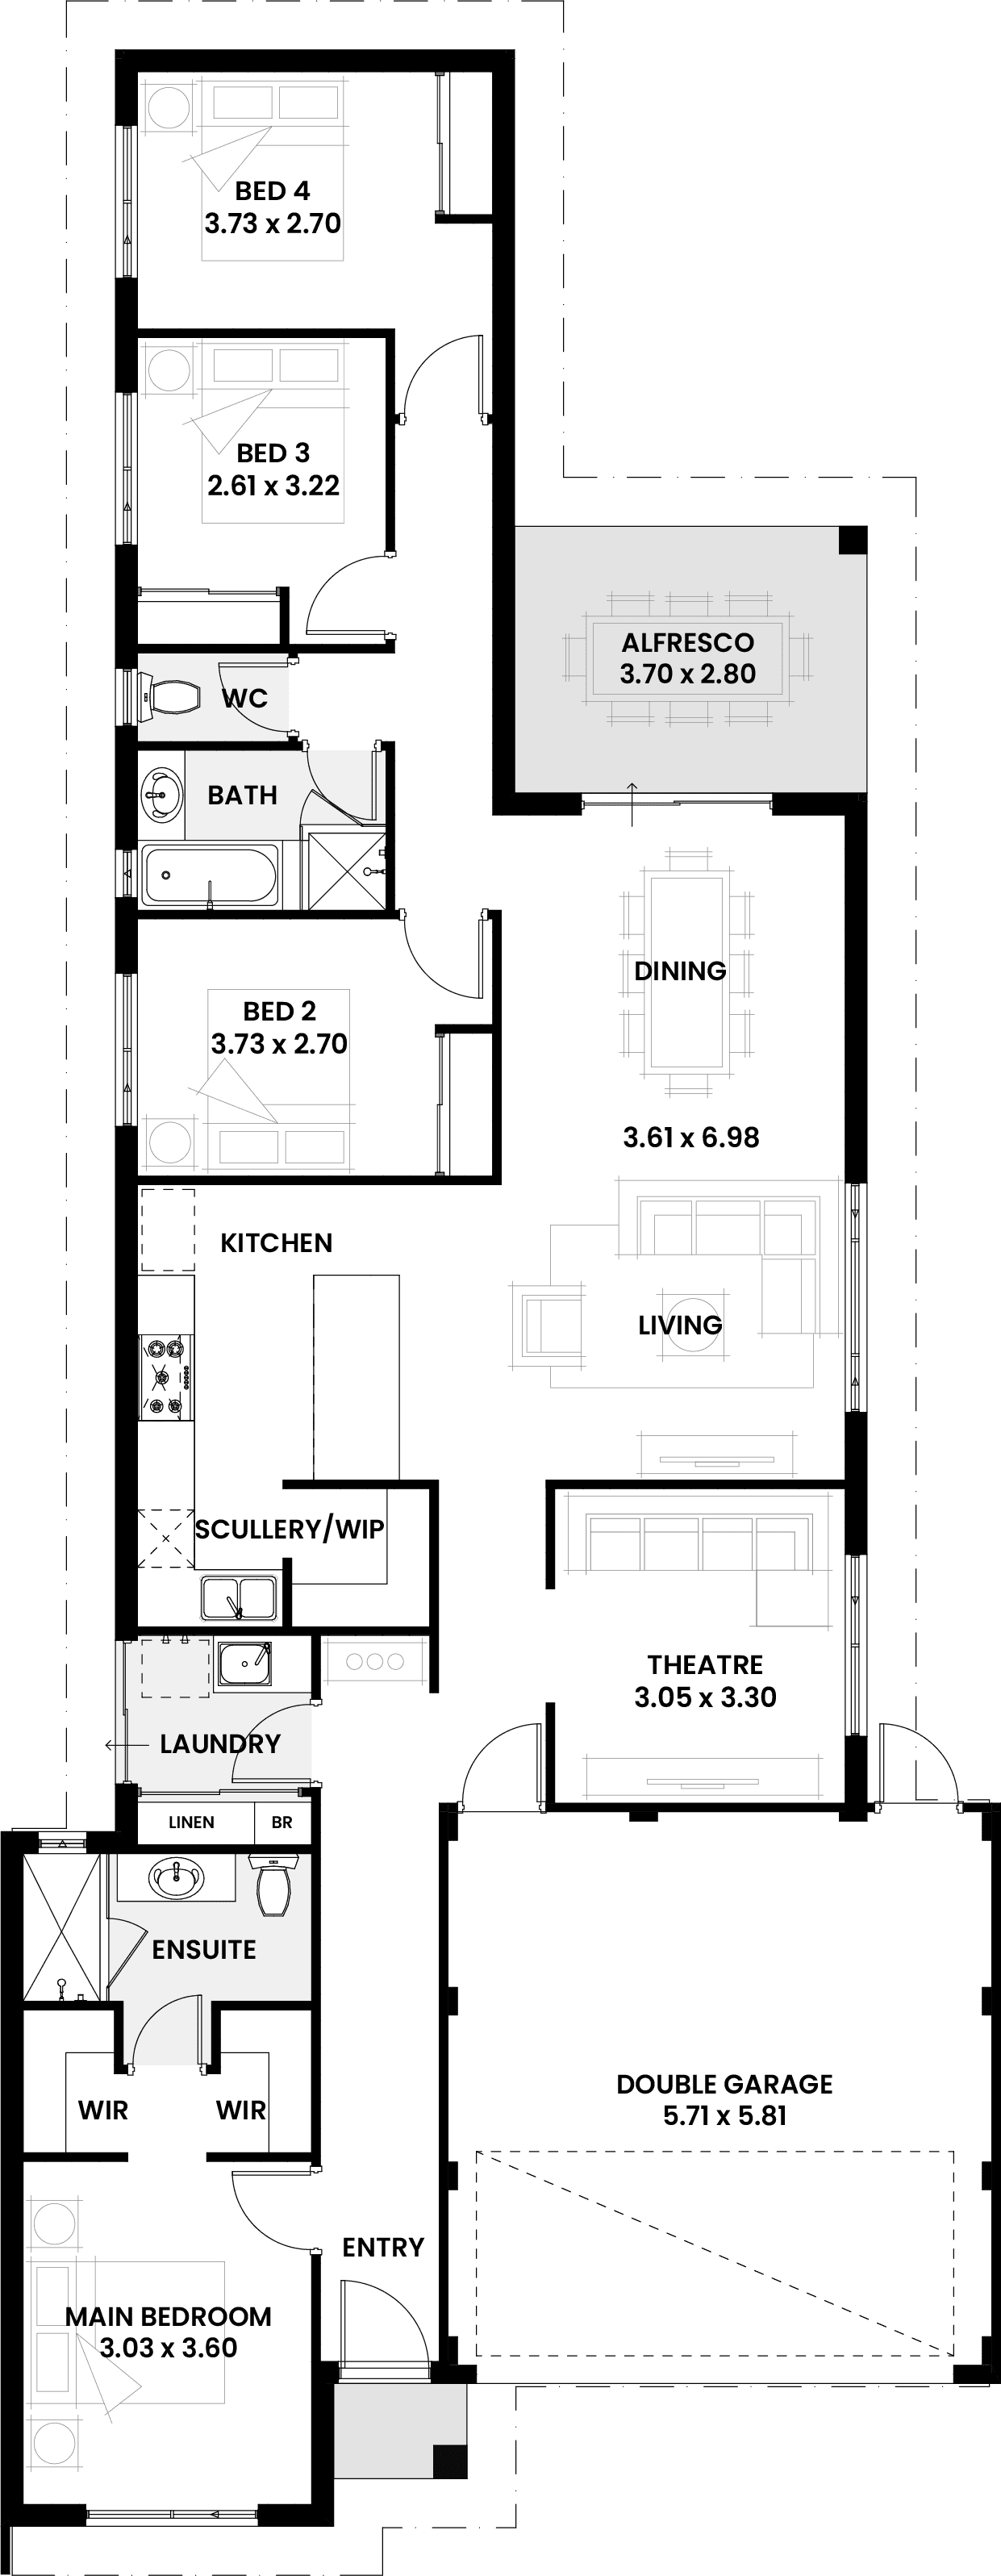 Floorplan for The Elm, a Move Homes new home design perfect for first time buyers and new builders in Perth